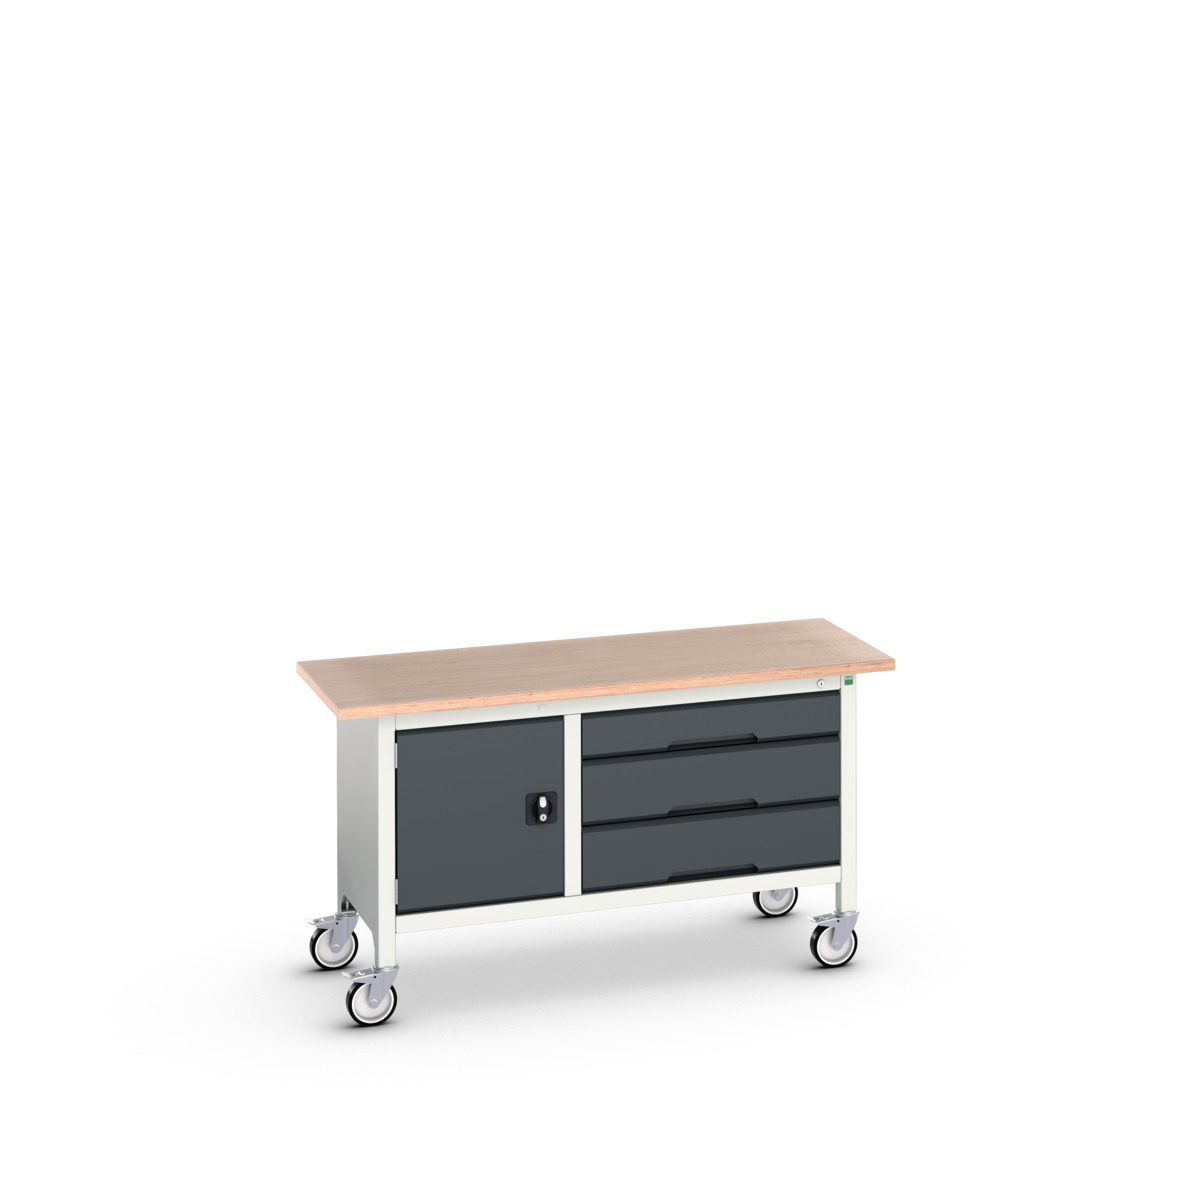 16923214.19 - verso mobile storage bench (mpx)